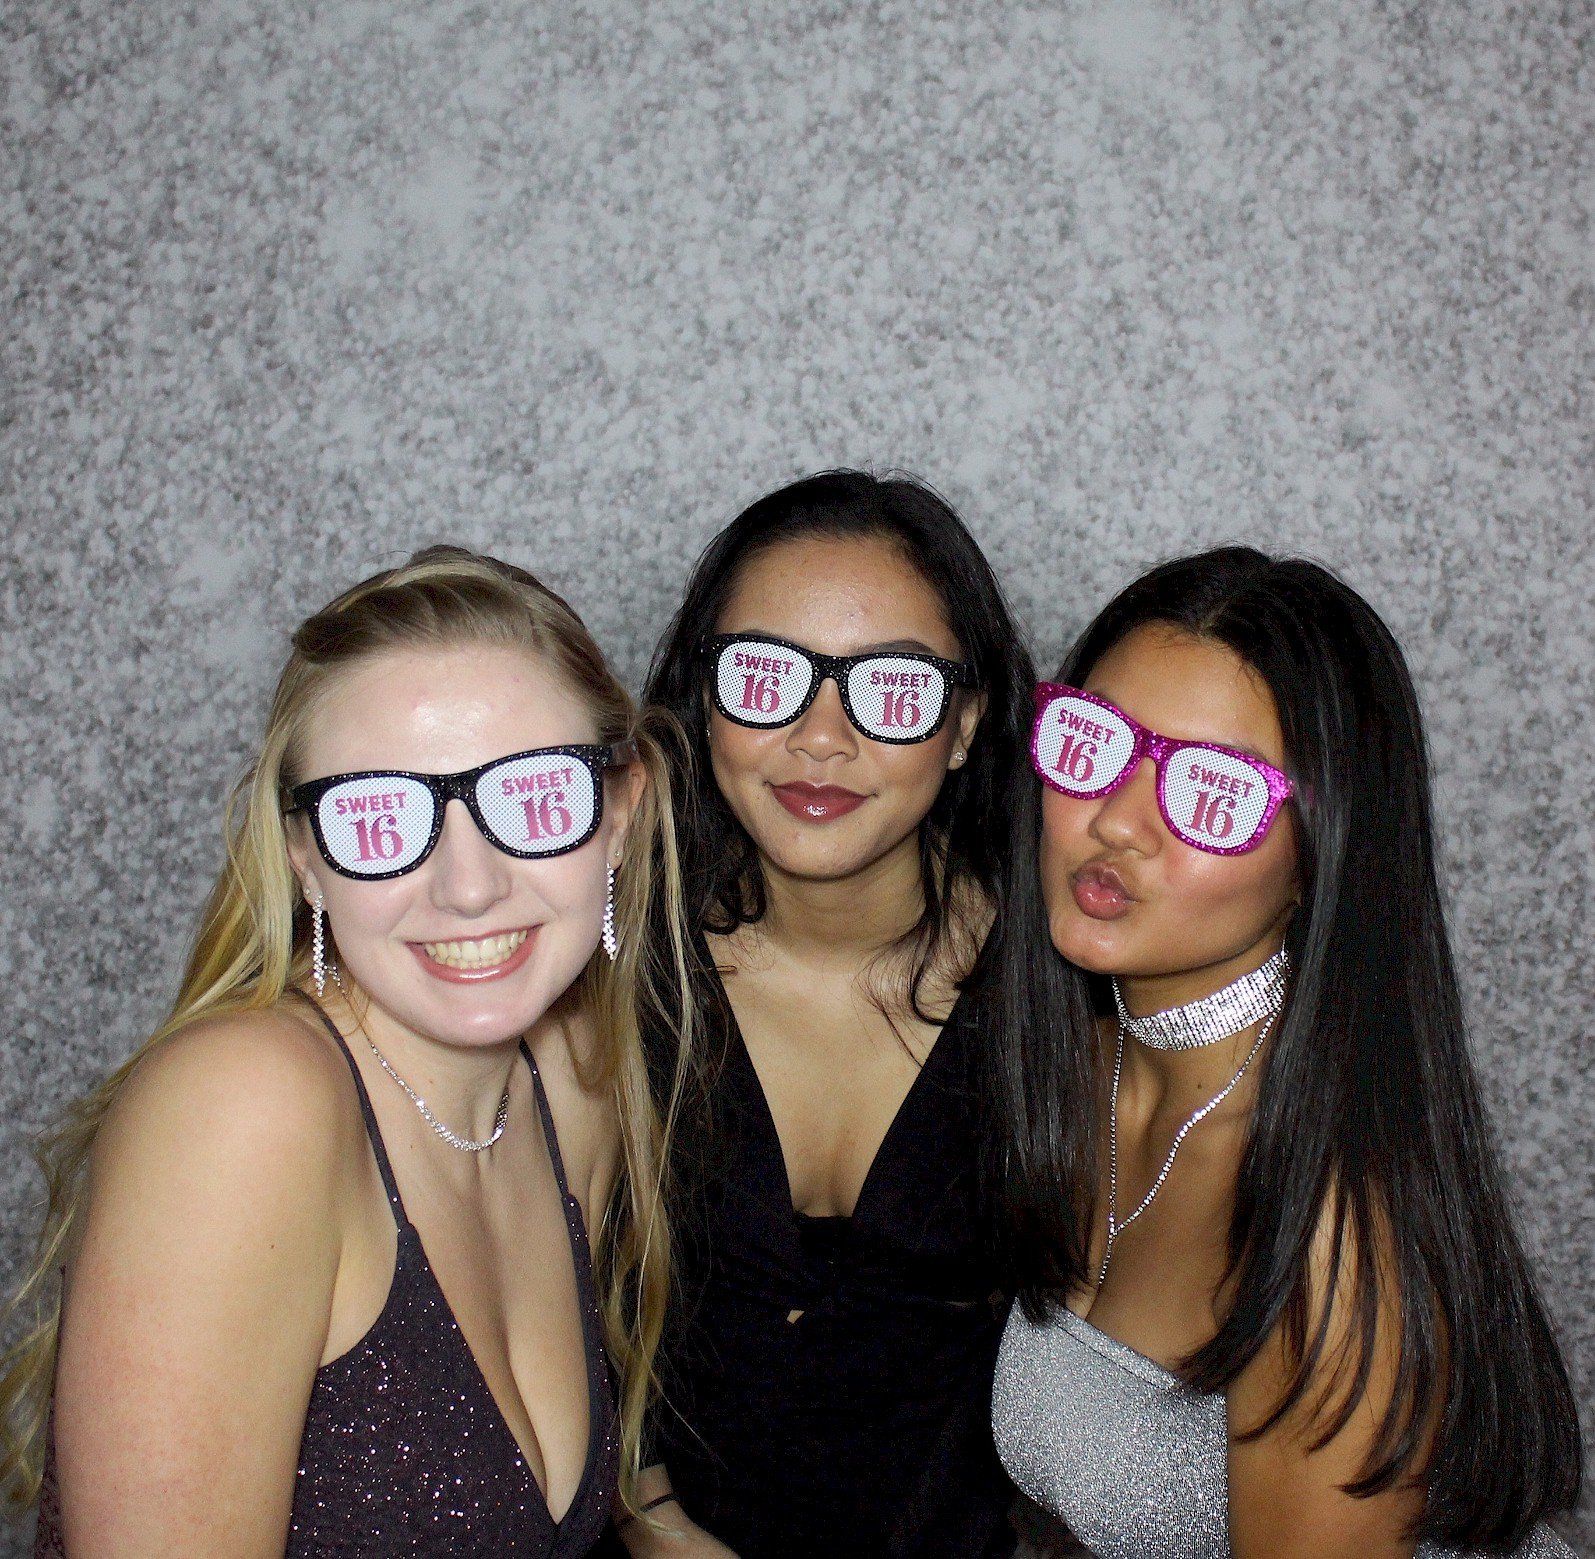 sweet 16 photo booth rentals in MA